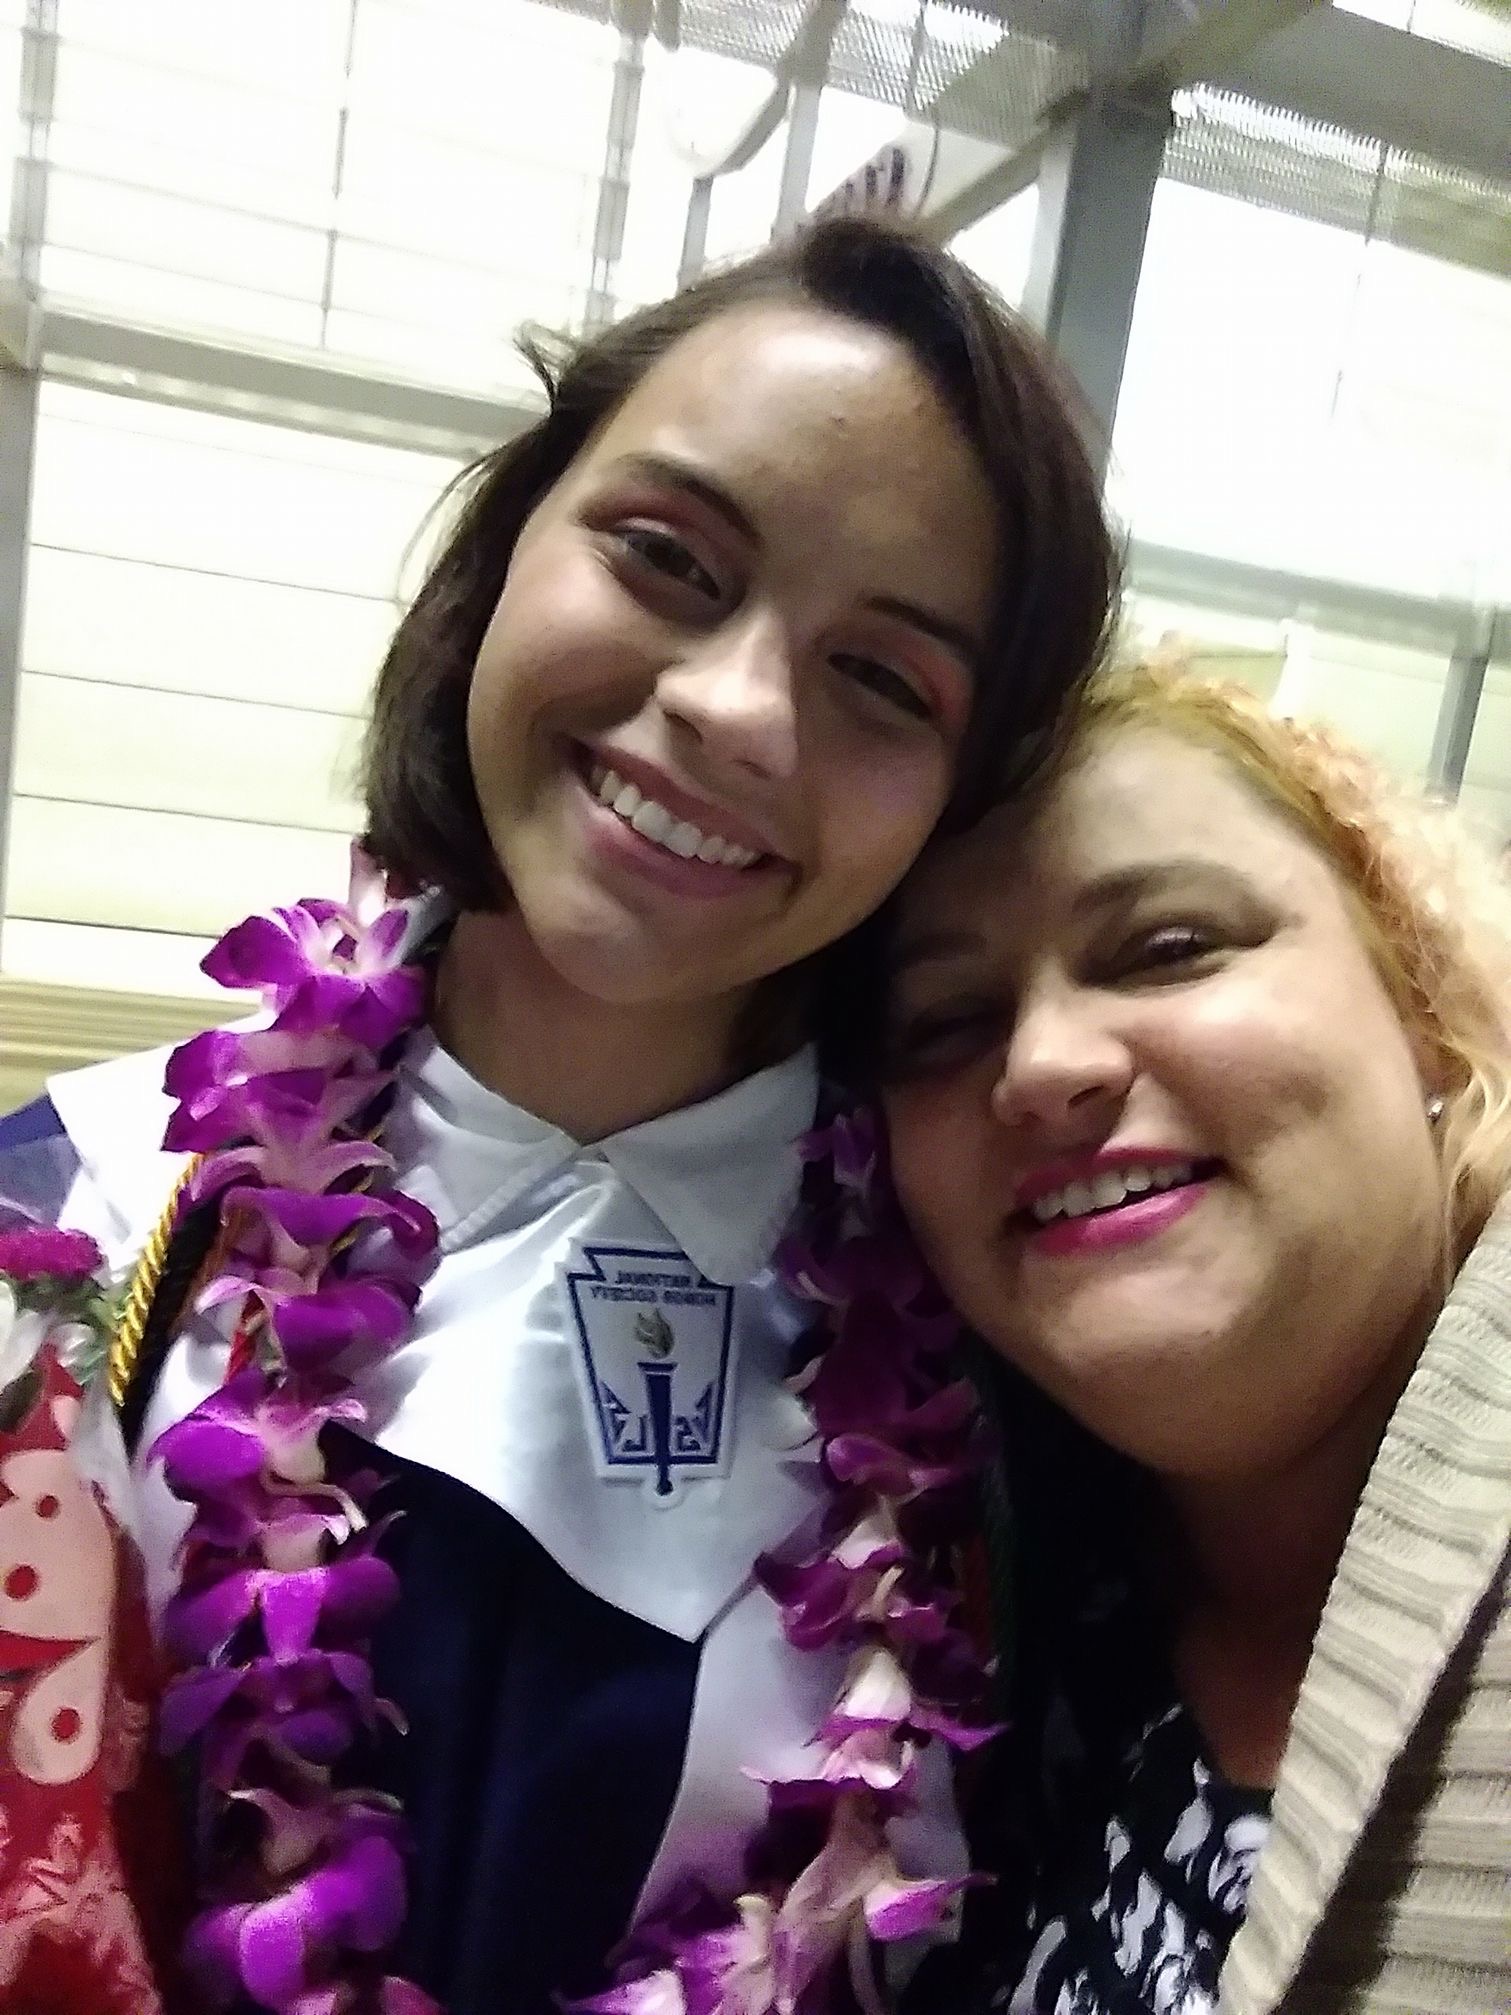 My oldest daughter, Ari, and me, at her graduation on May 23rd 2018